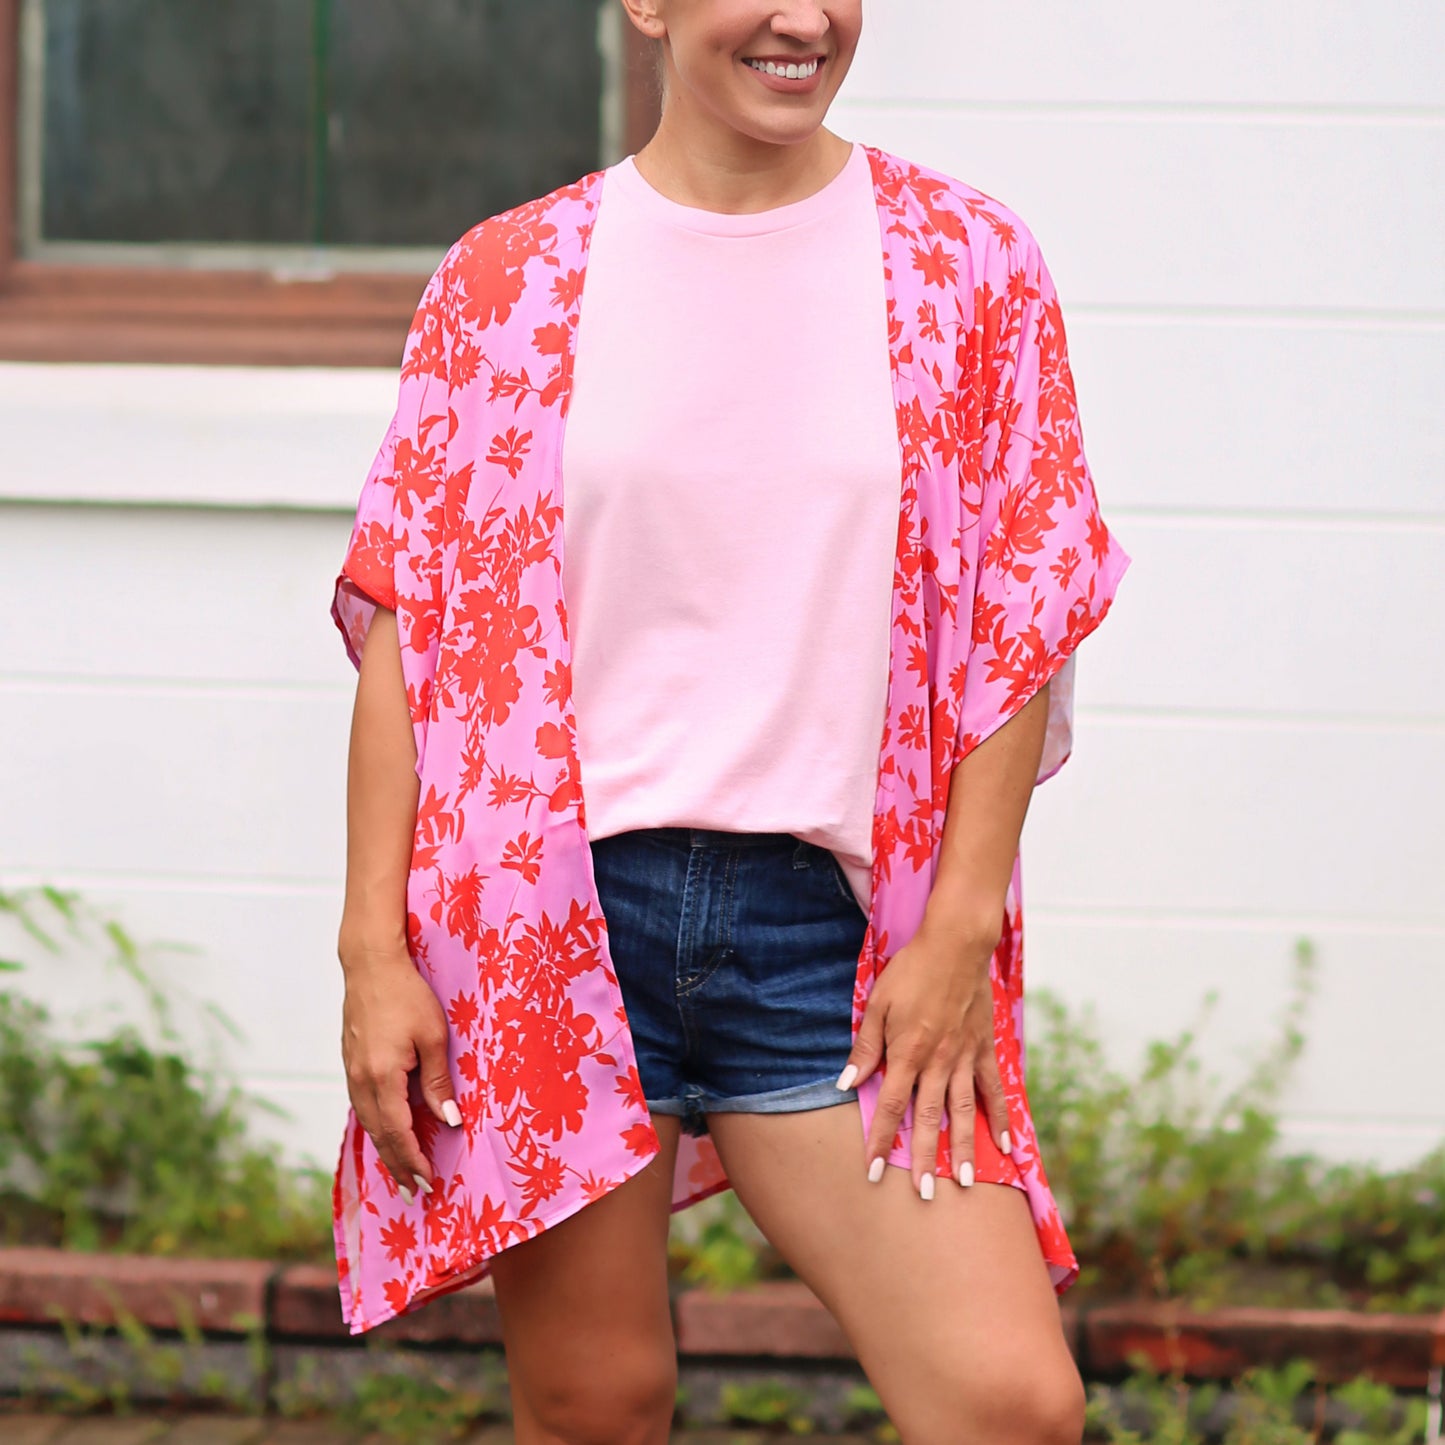 Pink and Red Floral Kimono - kimono, open flower shirt, boho kimono, kimono shirt, girls kimono, jacket, cardigan, beach cover up, layers